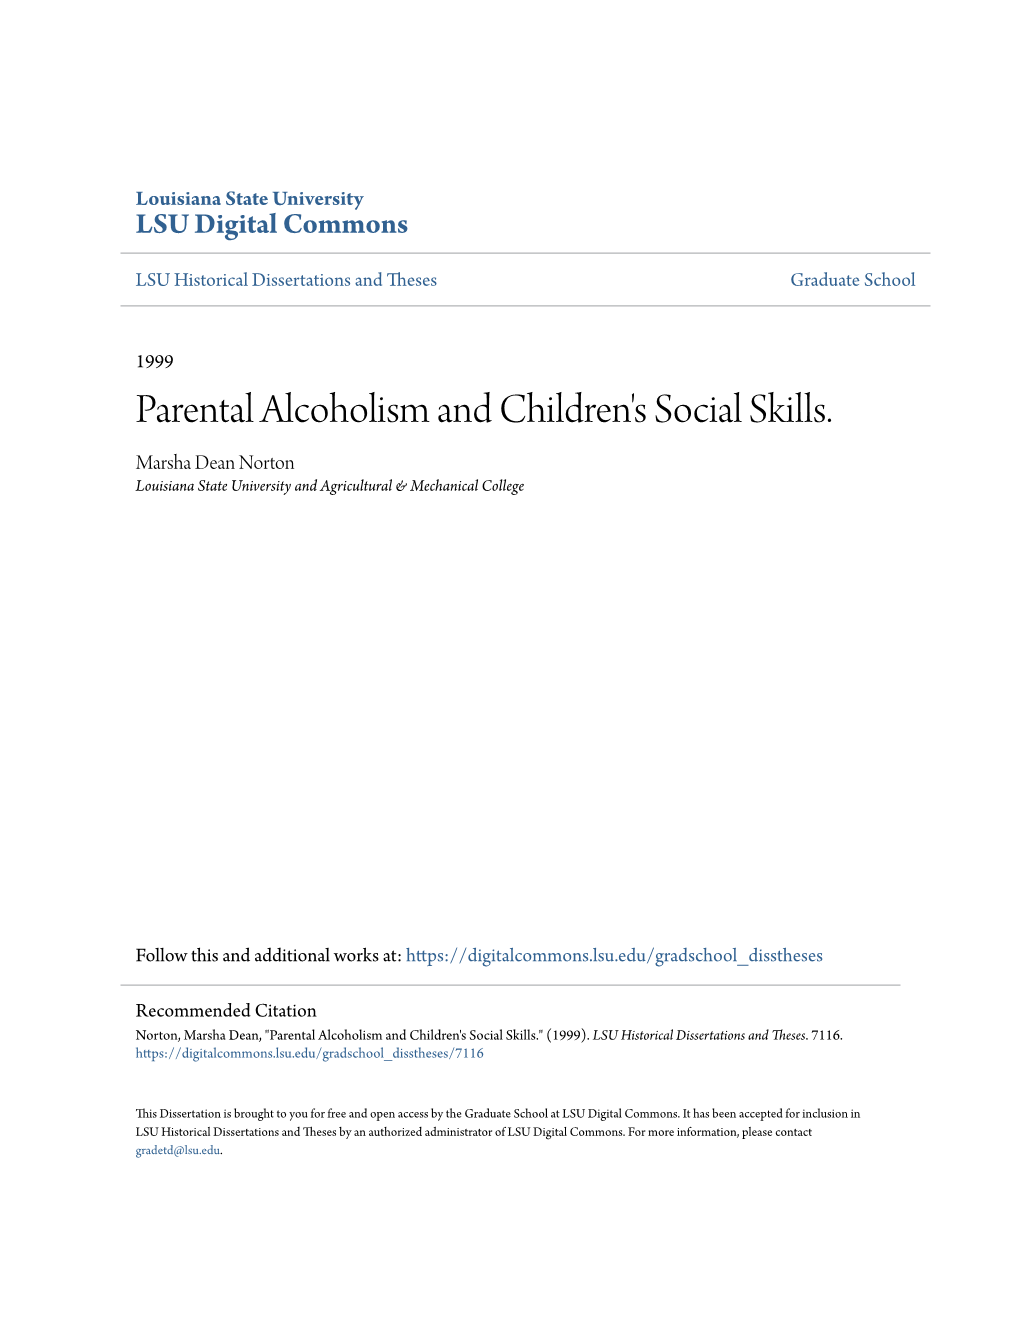 Parental Alcoholism and Children's Social Skills. Marsha Dean Norton Louisiana State University and Agricultural & Mechanical College